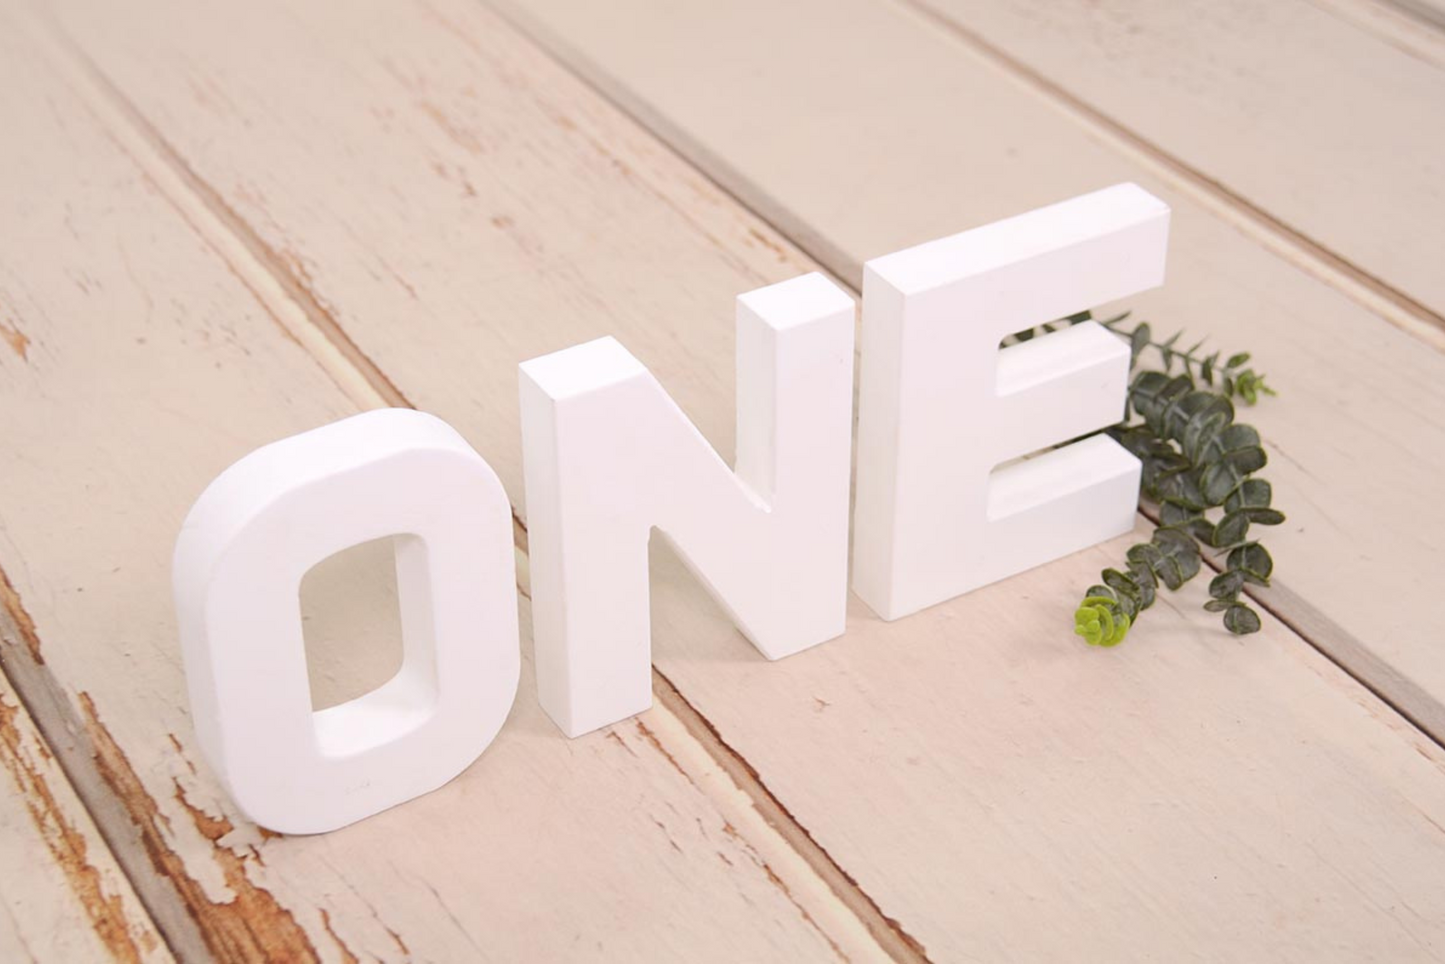 White wooden letters spelling out 'ONE' on a rustic wooden background, ideal for cake smashes or milestone photography.